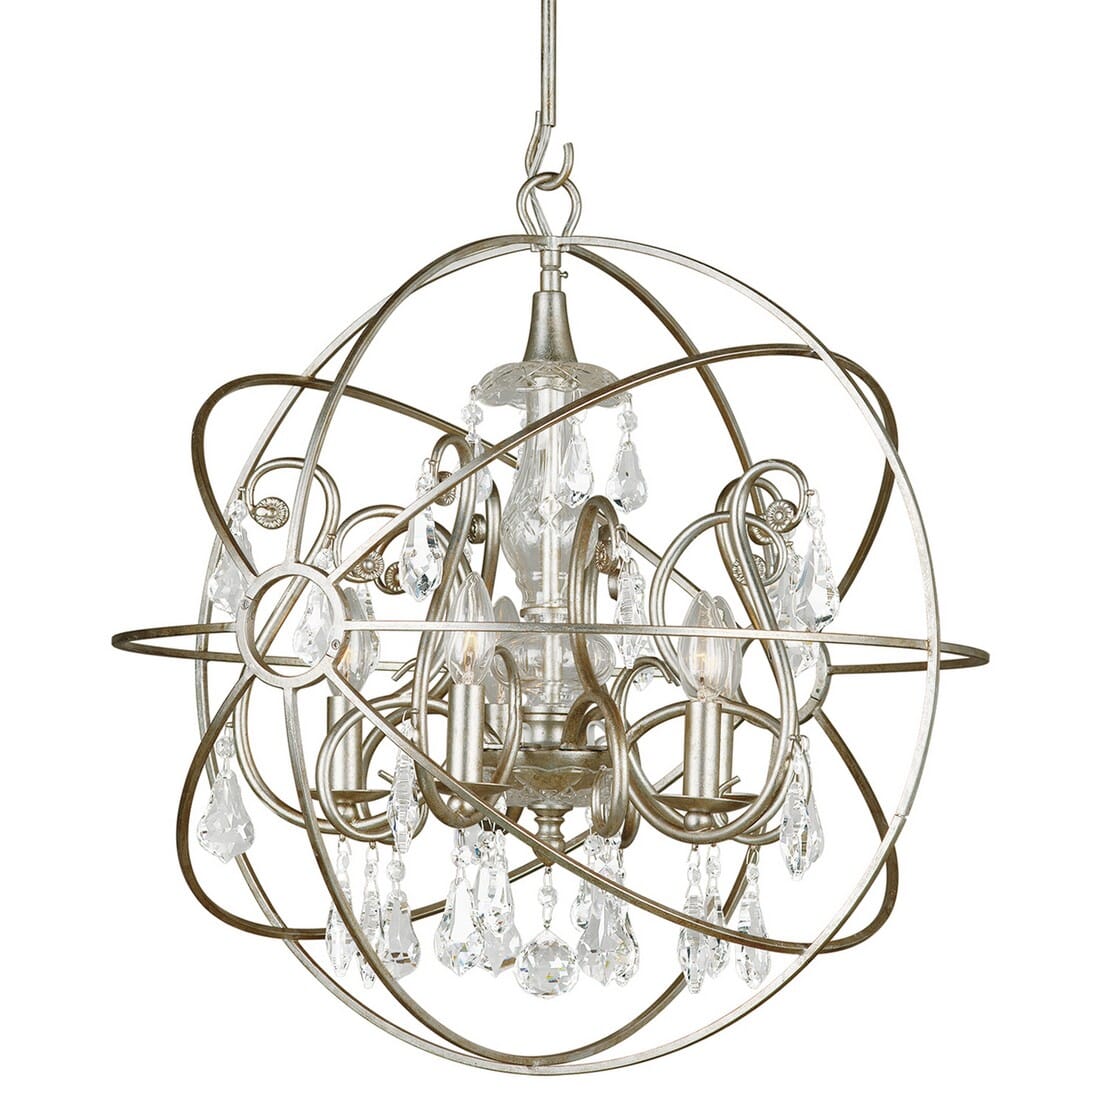 Solaris 5-Light 24"" Industrial Chandelier in Olde Silver with Clear Swarovski Strass Crystals -  Crystorama, 9026-OS-CL-S